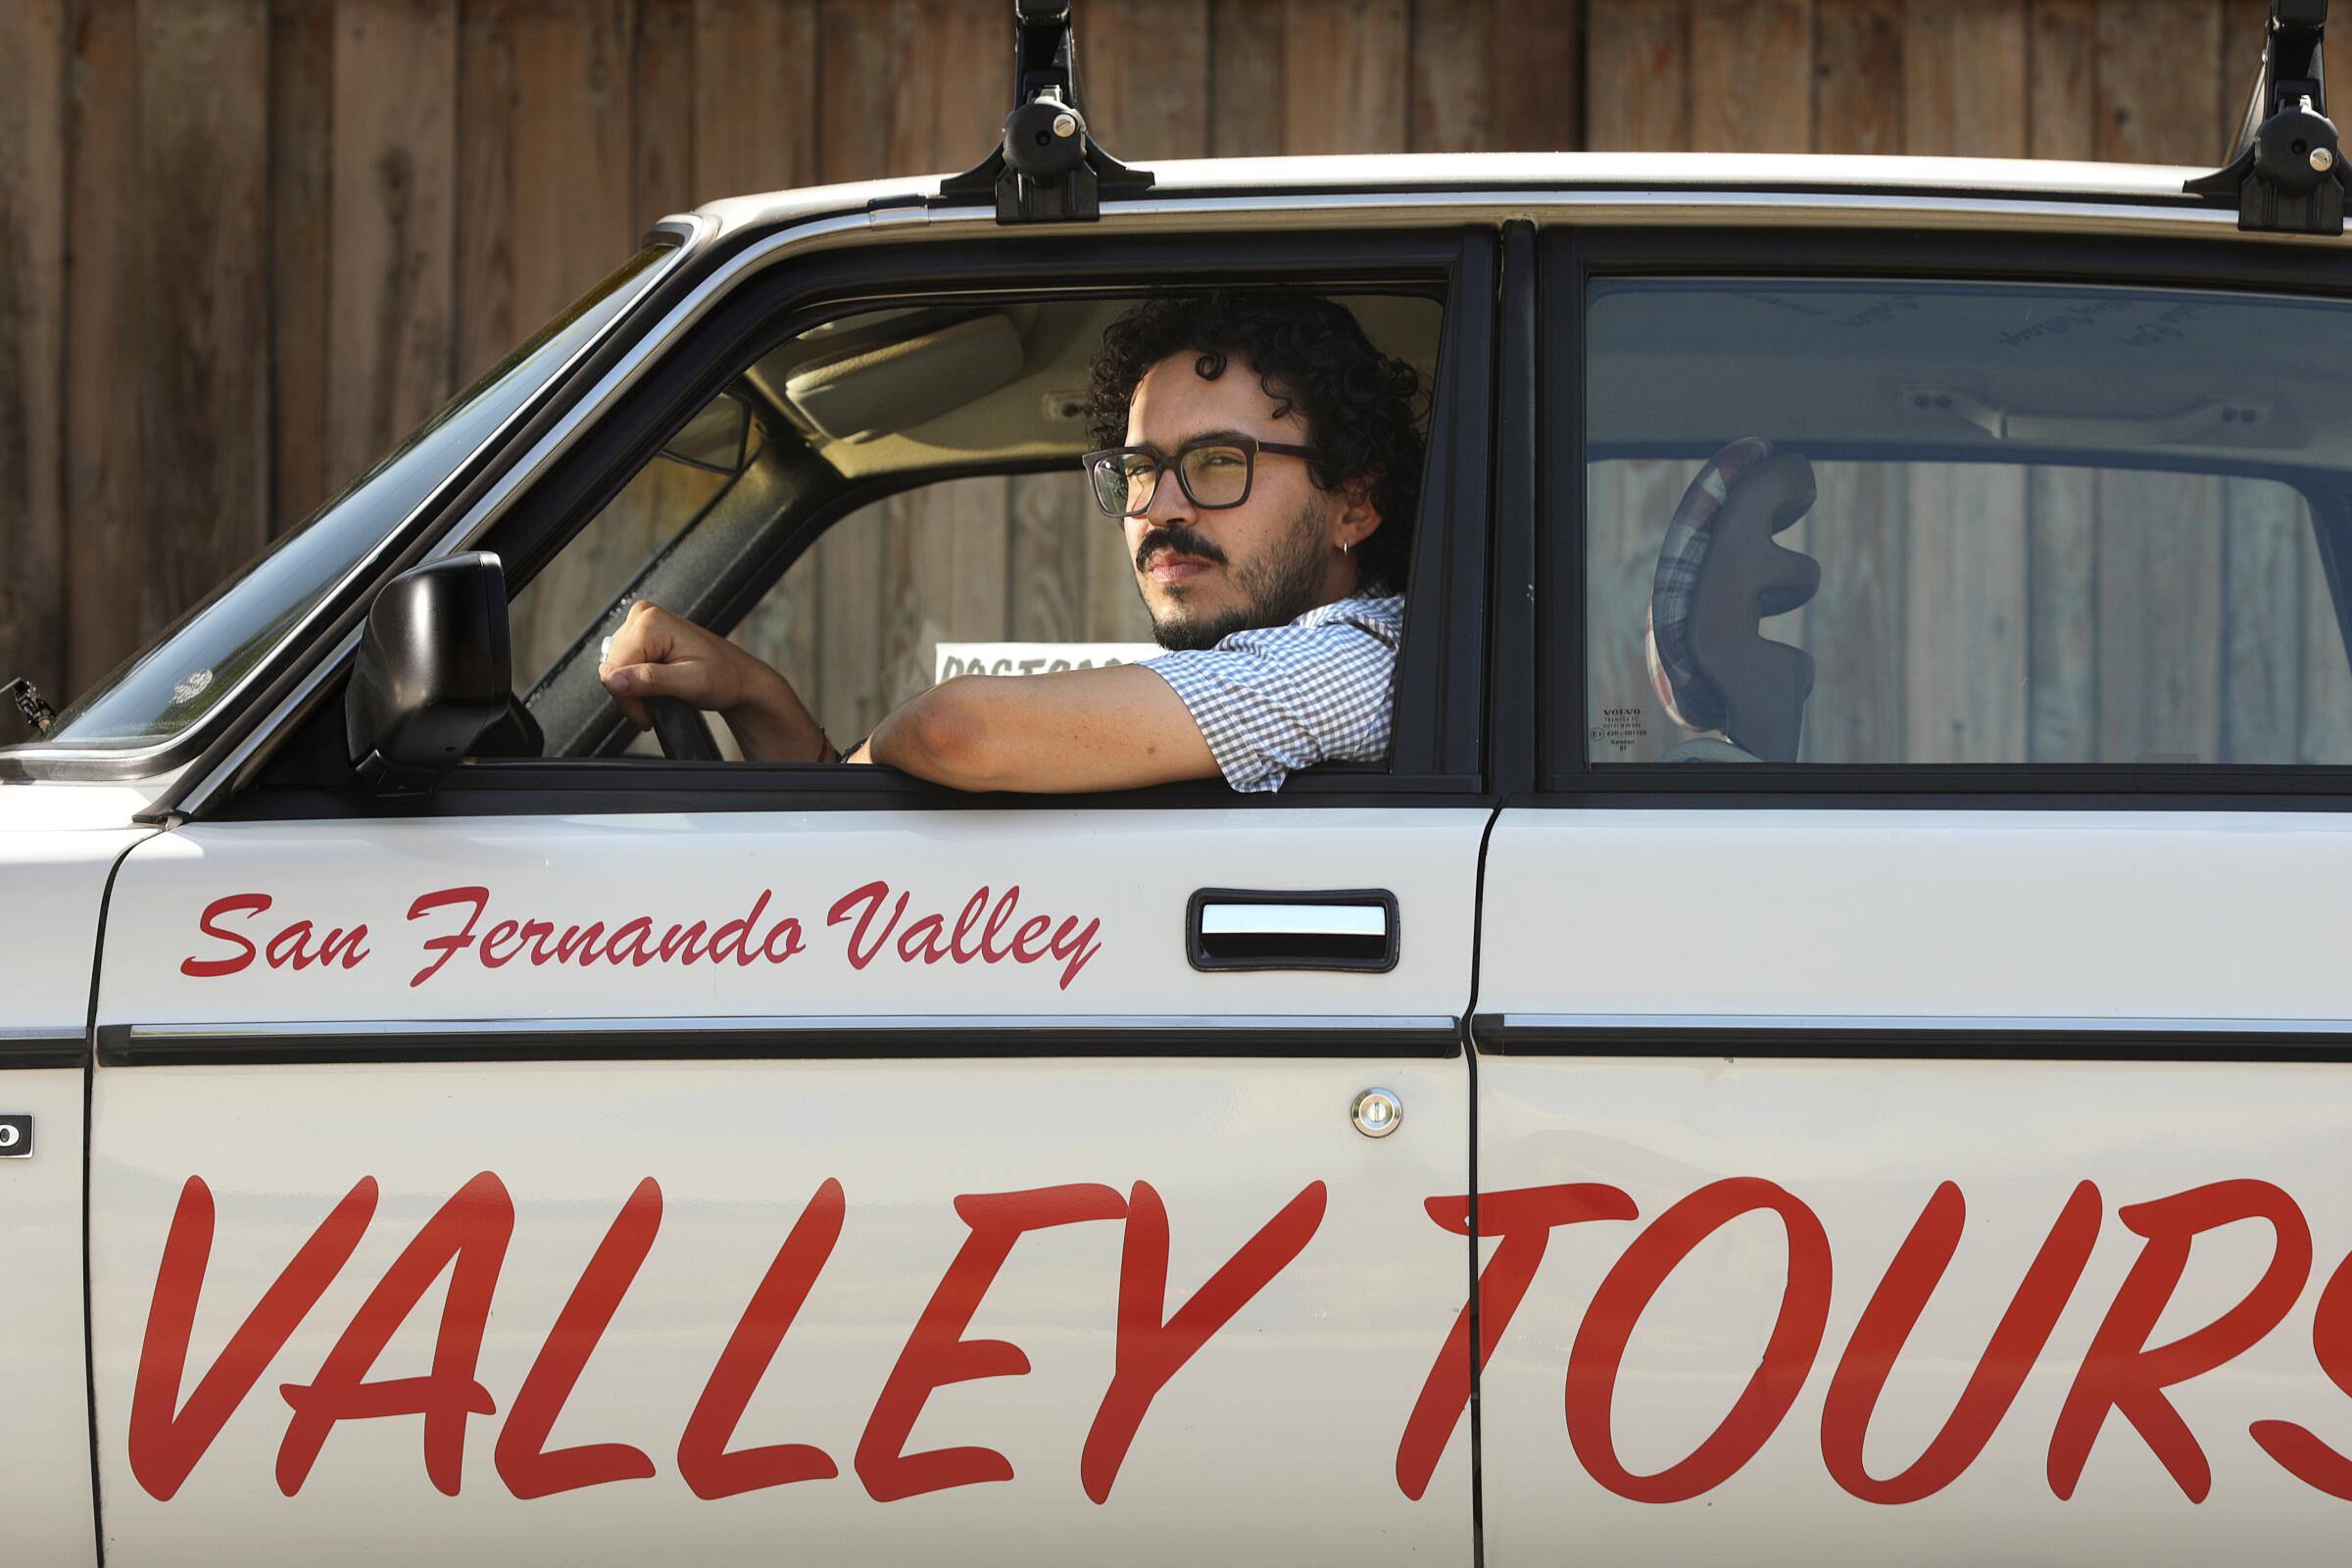 Vincent Enrique Hernandez in a Volvo reading "VALLEY TOURS" in red text. 